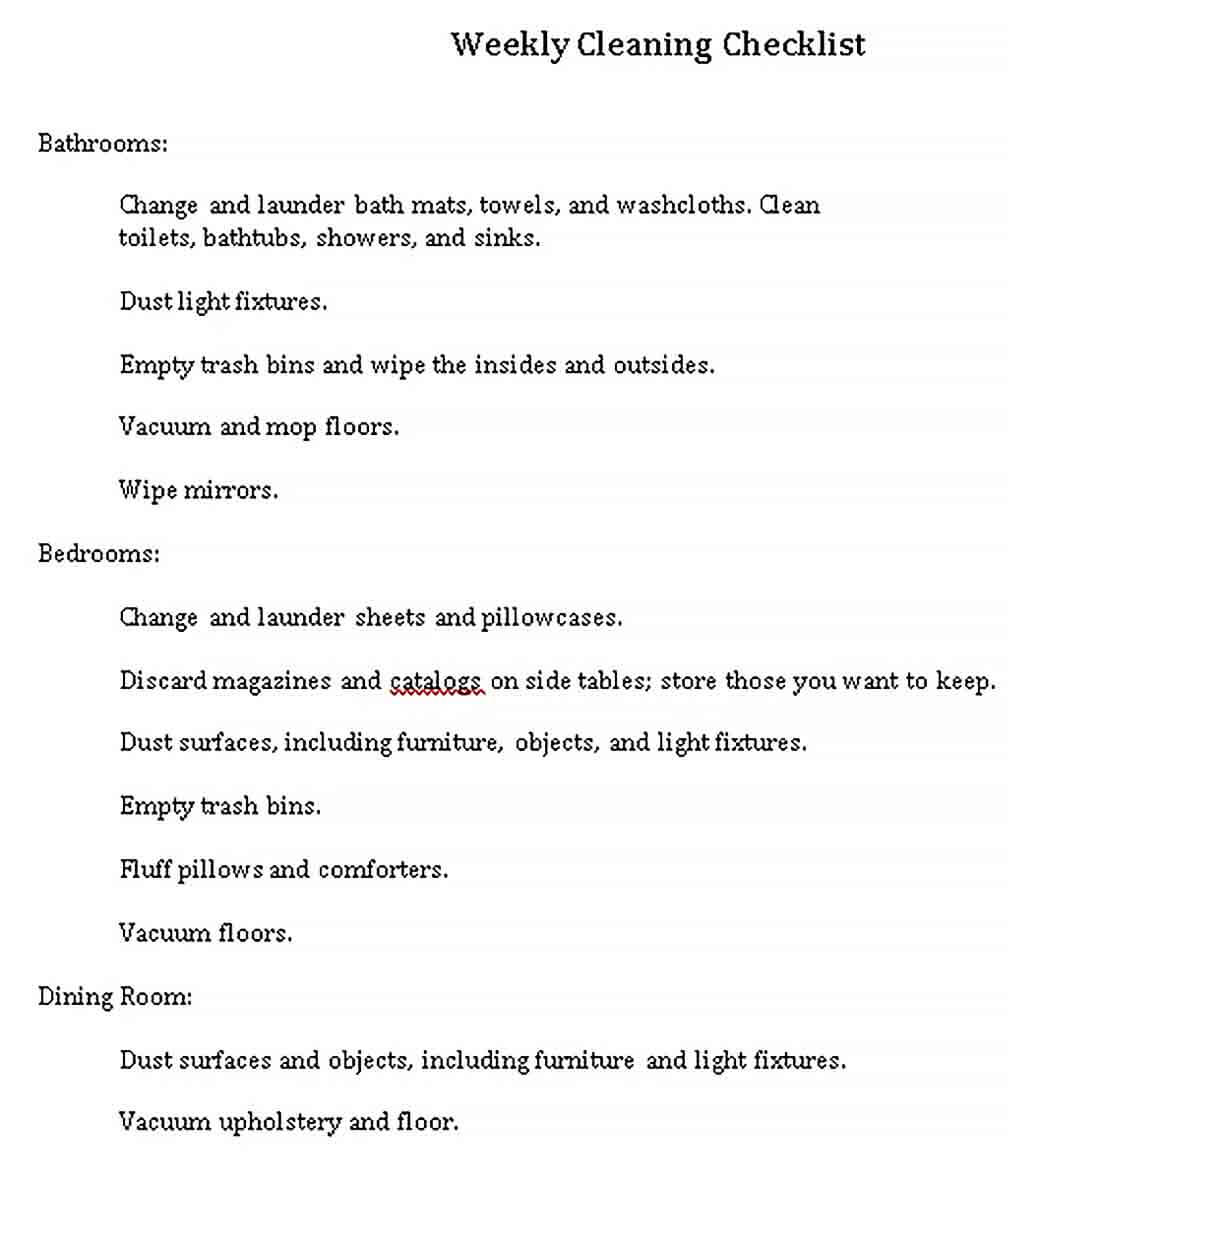 Sample Cleaning Weekly Checklist Template